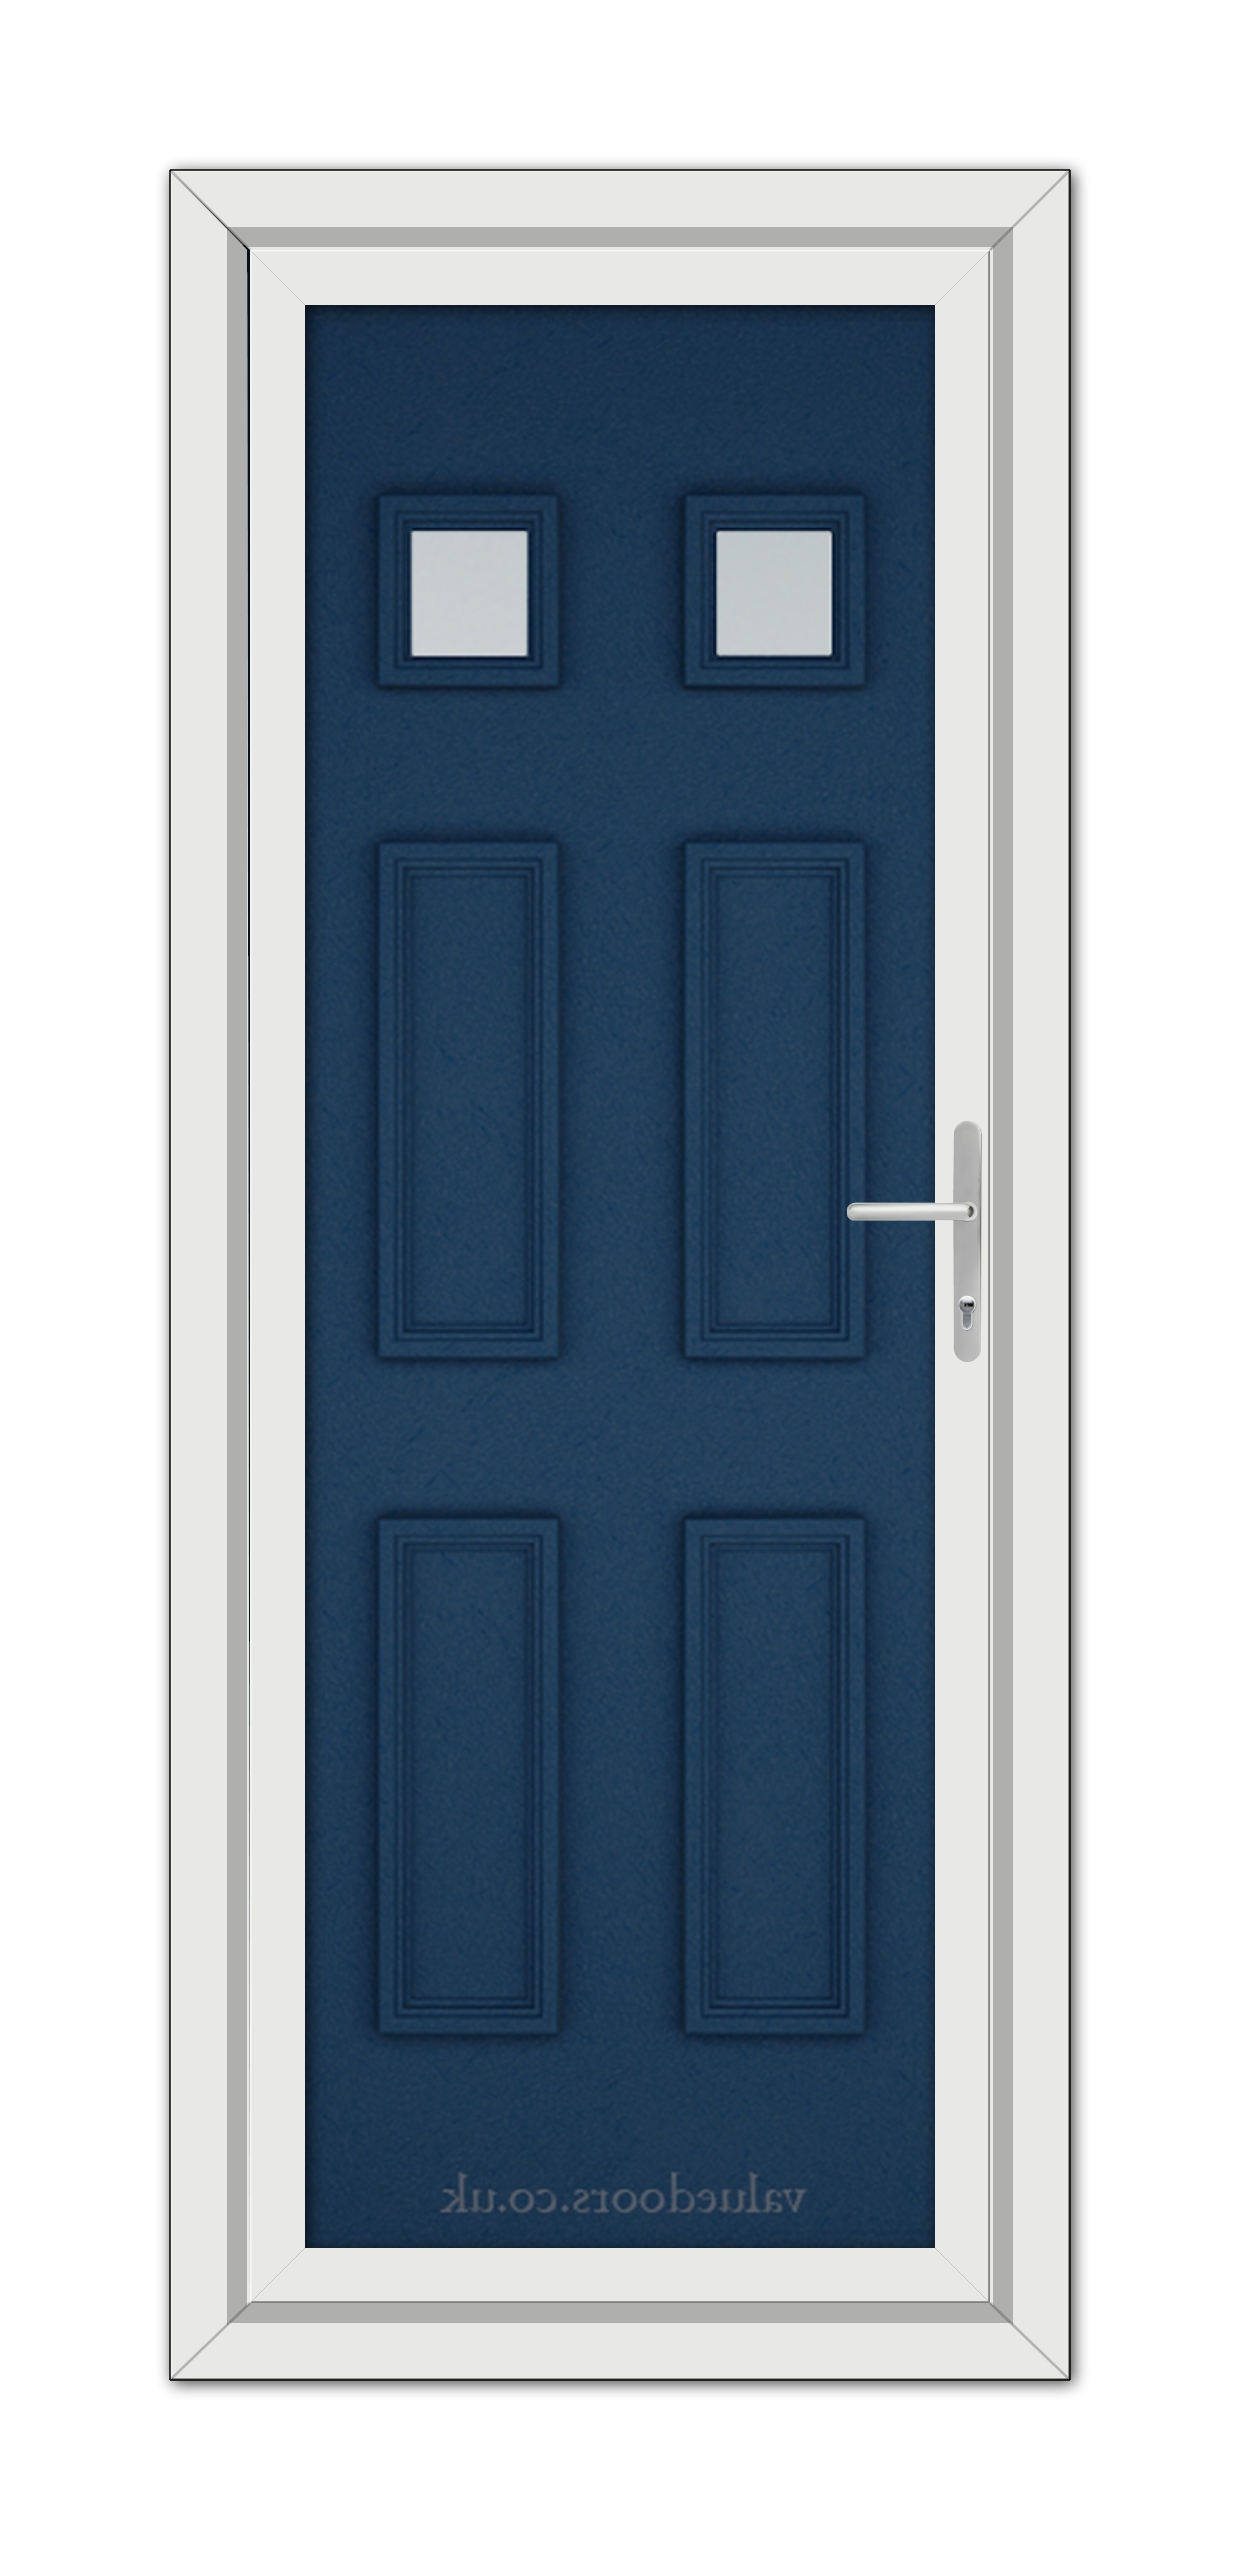 A modern Blue Windsor uPVC Door with two small rectangular windows at the top and a silver handle, set within a white door frame.